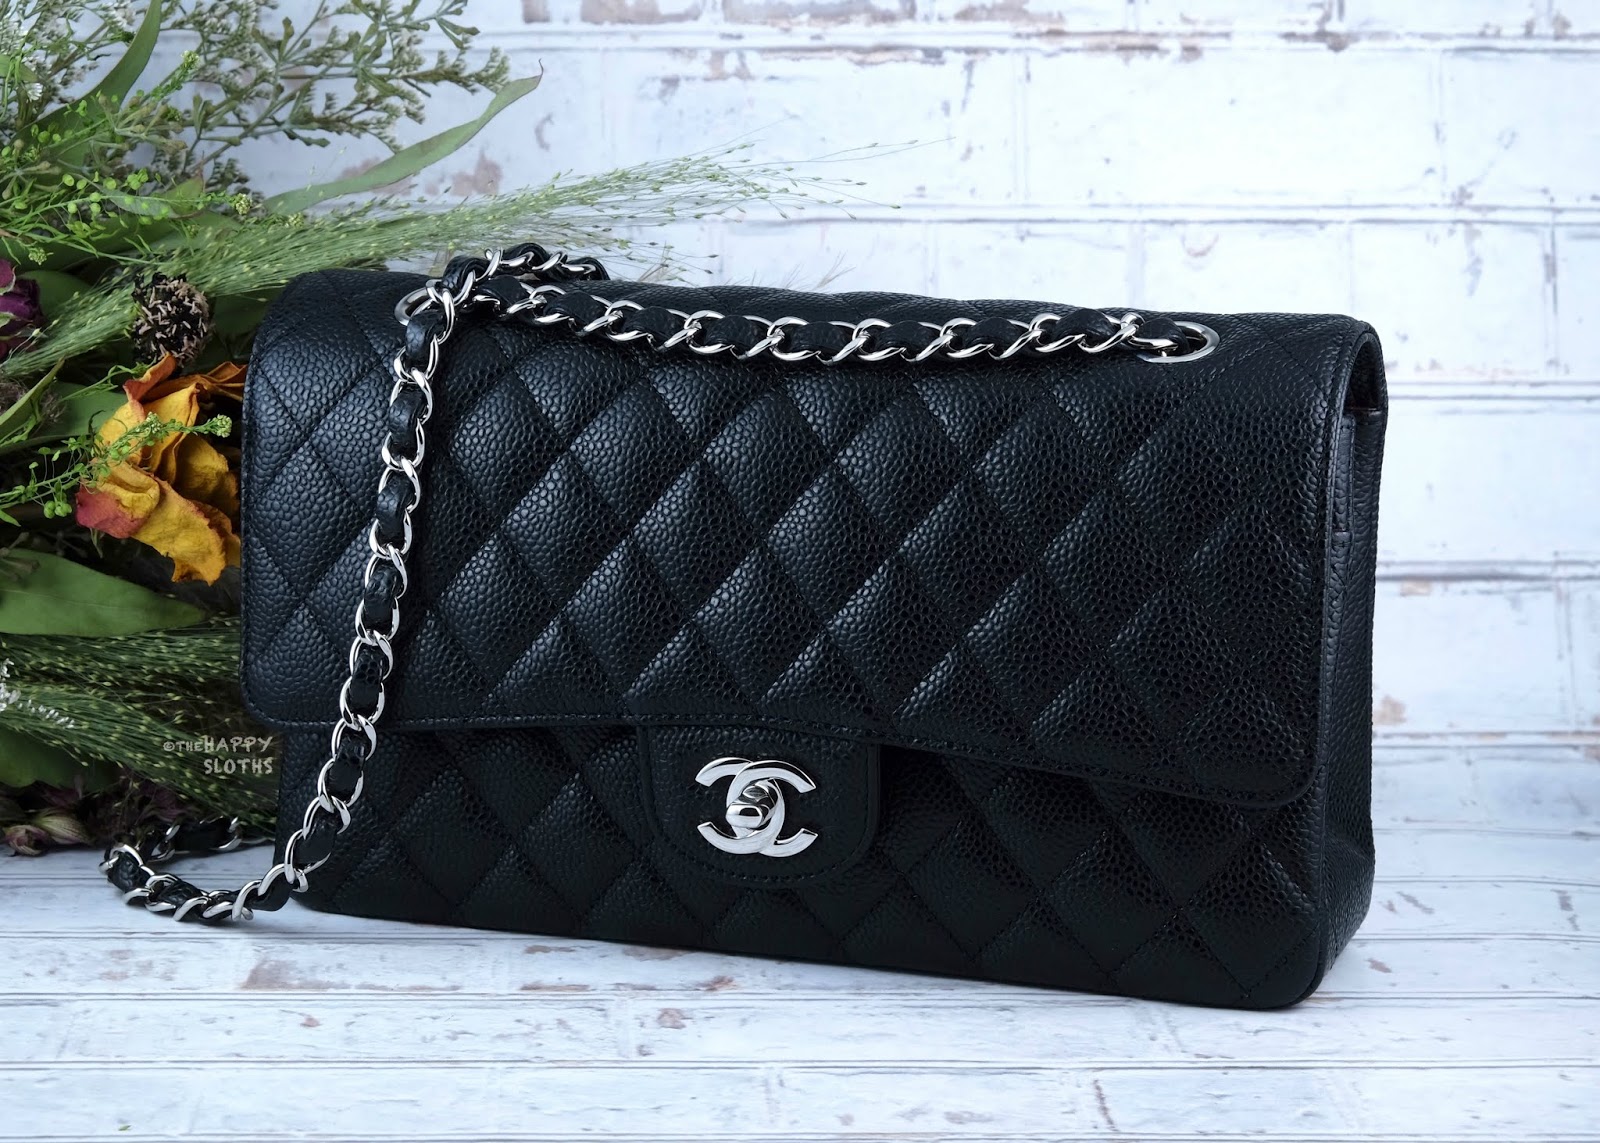 Chanel | Medium Classic Flap Handbag in Black Caviar Leather with Silver Hardware: Review